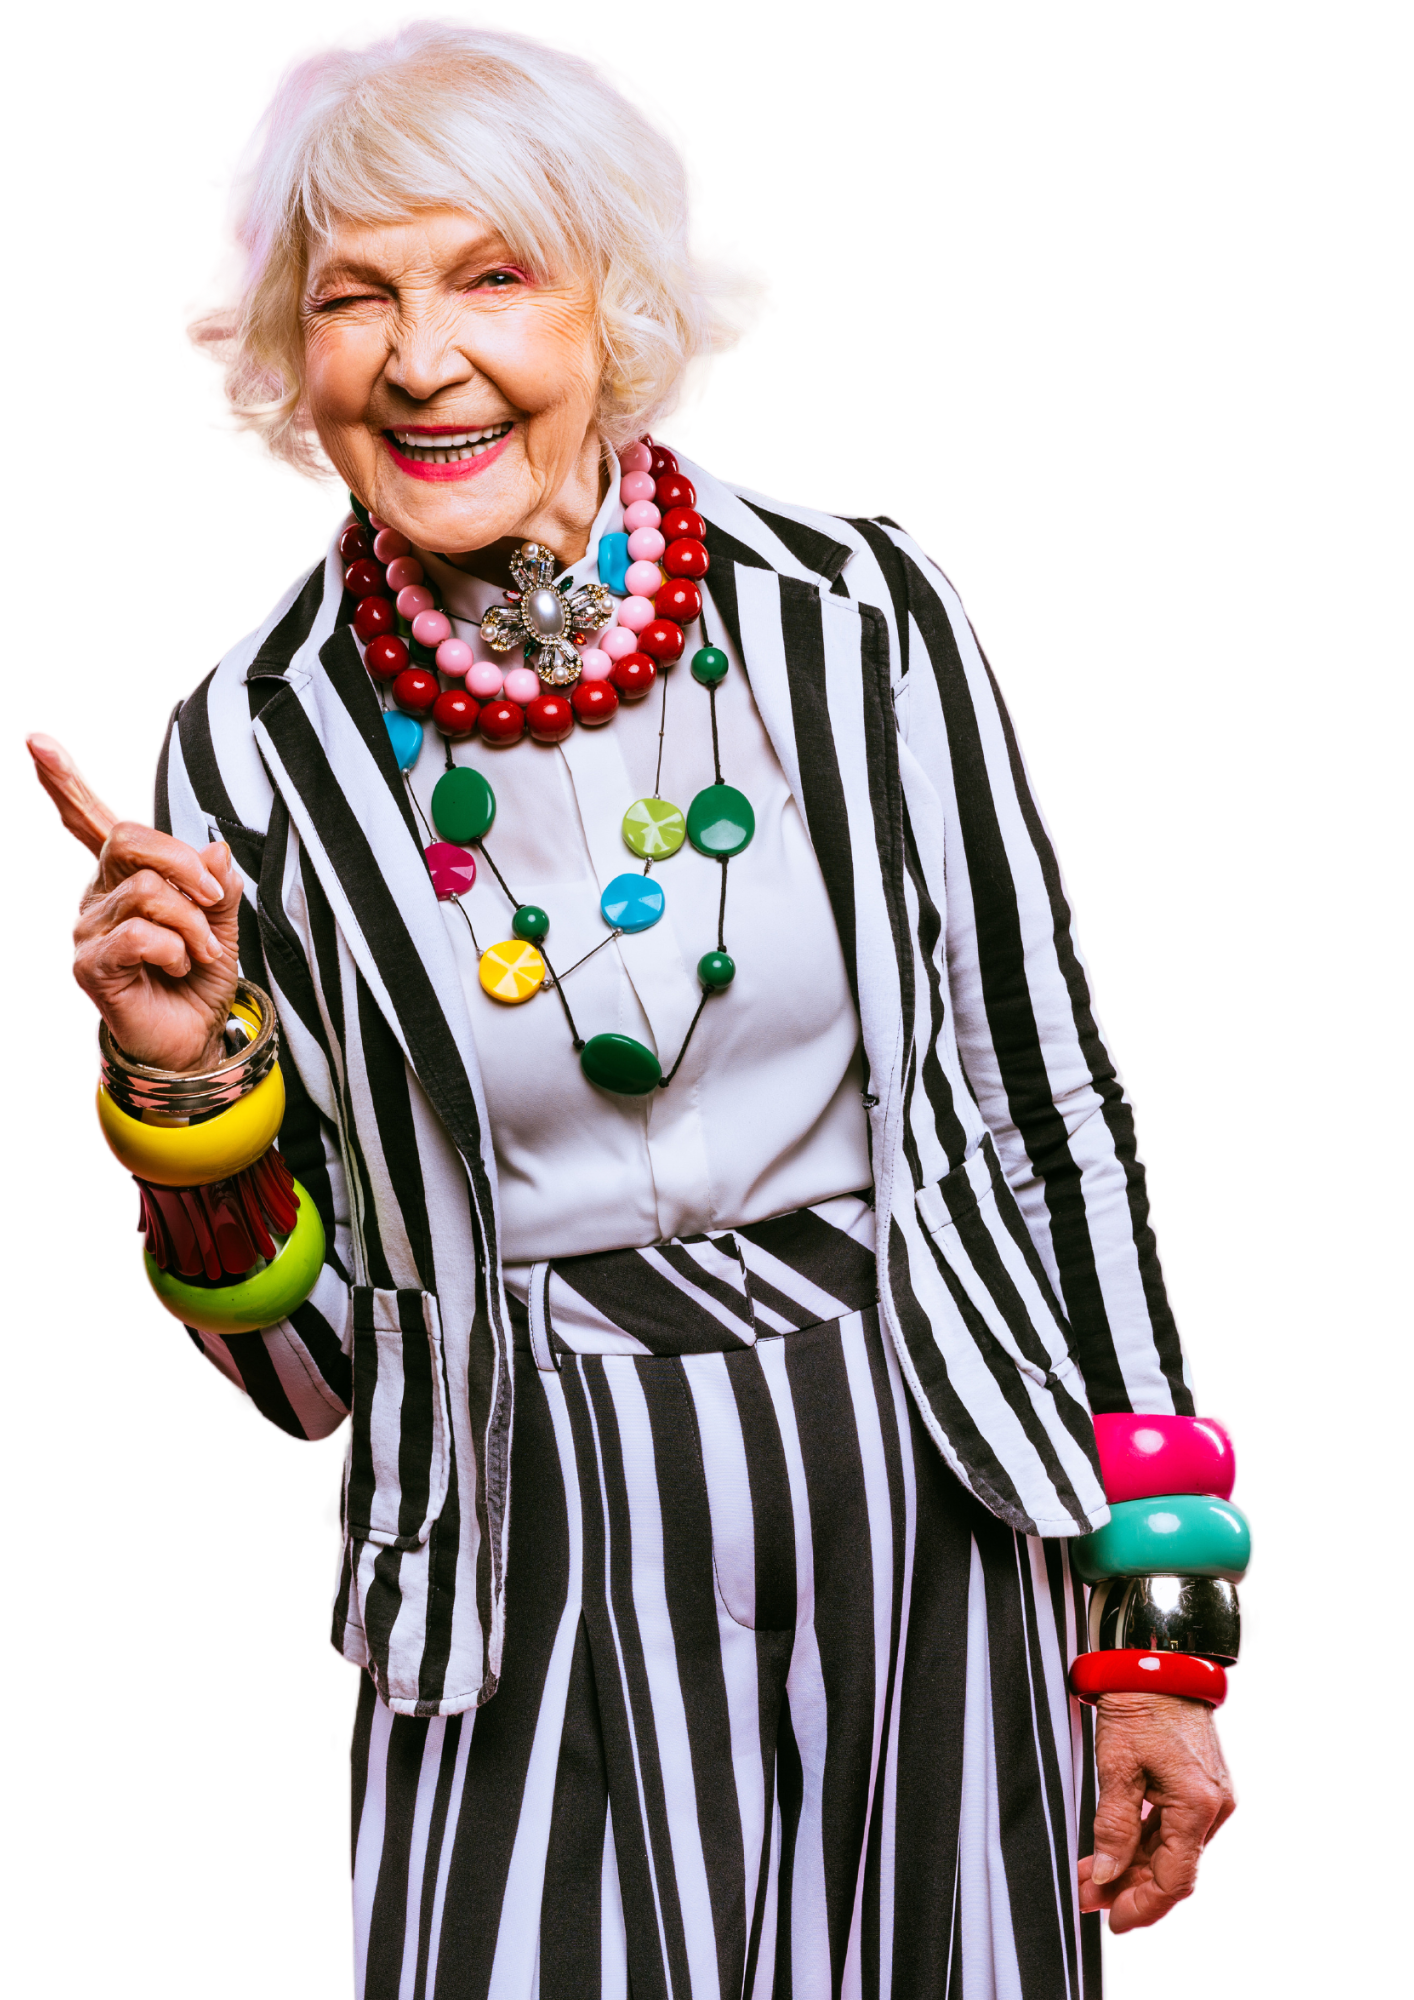 Senior lady with striped suit on and colourful necklace pointing upwards